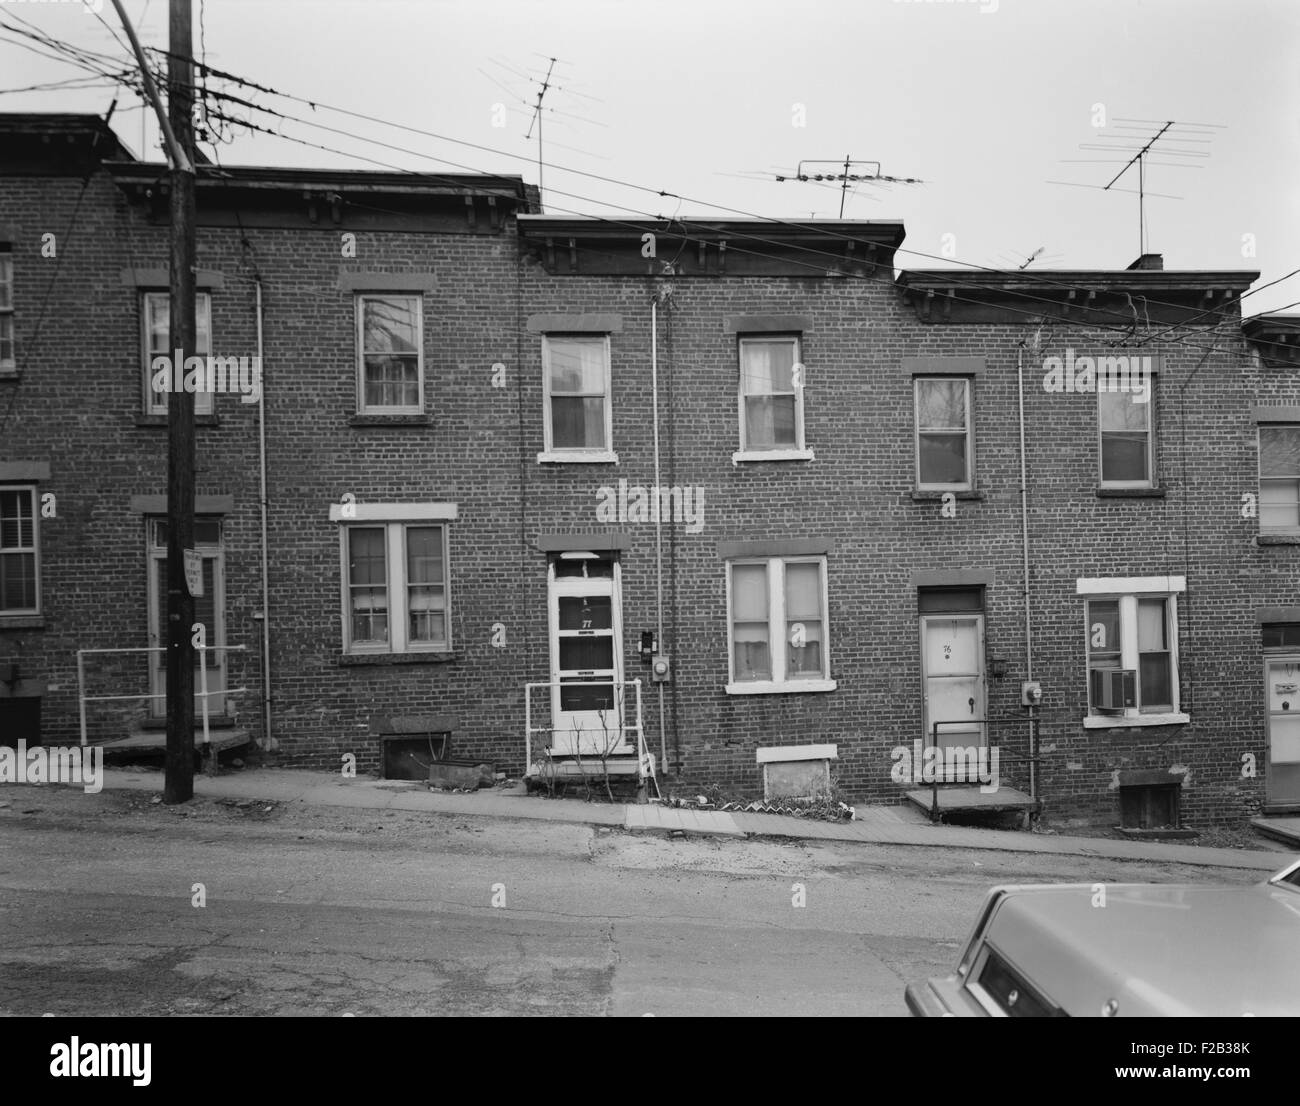 Yonkers, New York, ca. 1980. Moquette Row Housing was built between 1886 and 1889. Each bonds to its neighbors in a continuous row along the hill slope. View north showing front elevation. Westchester County, NY. (BSLOC 2015 11 7) Stock Photo